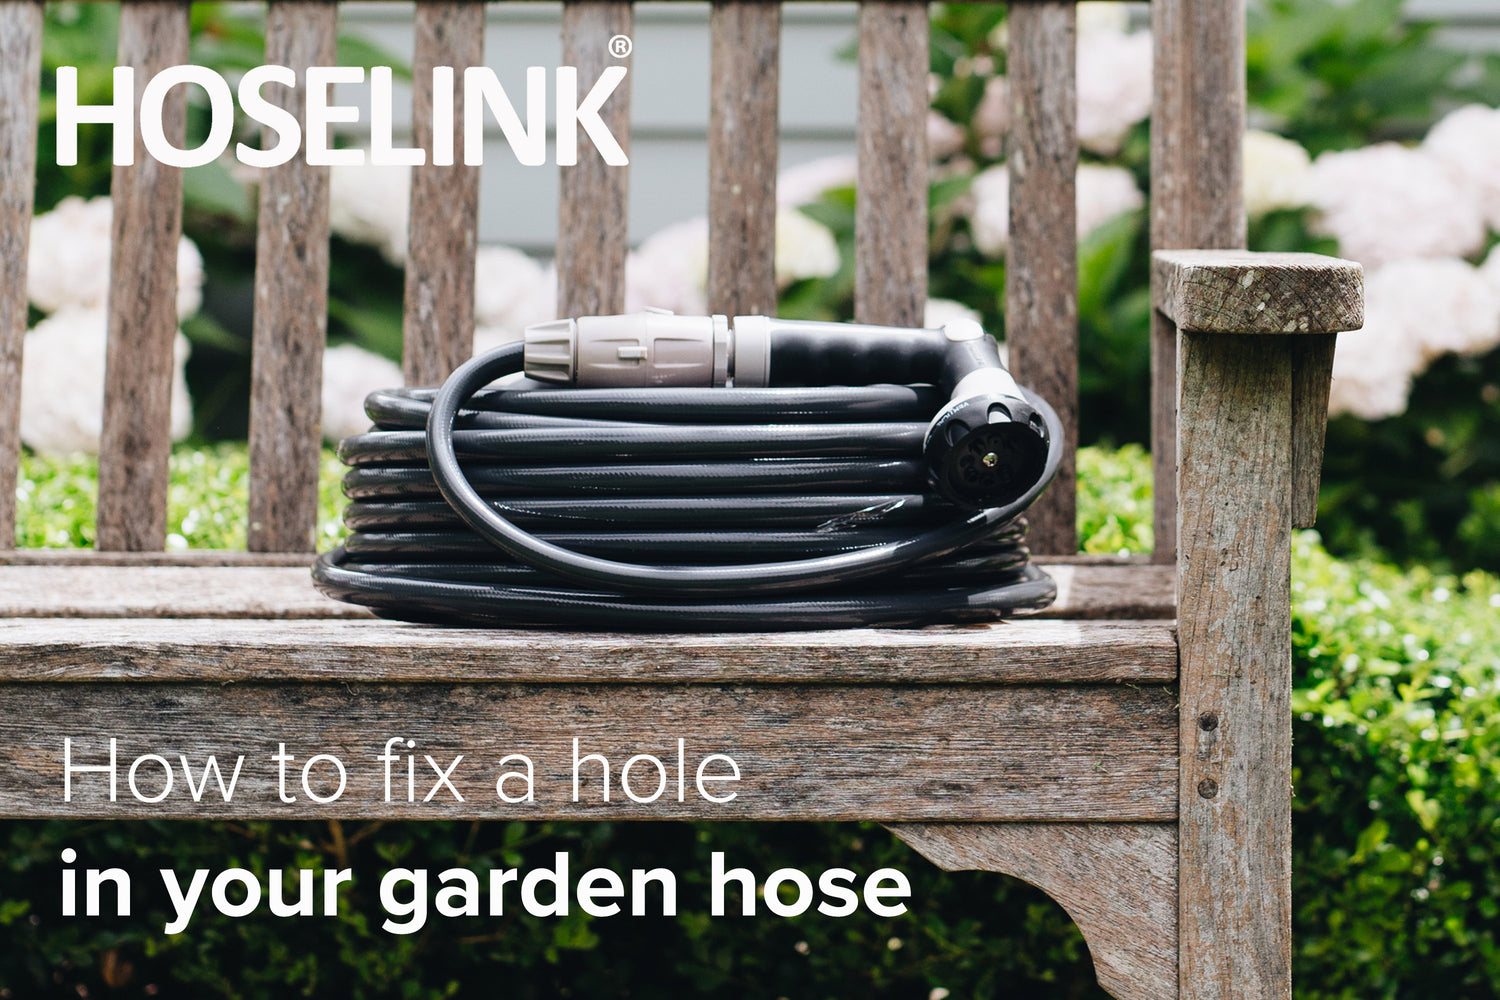 How to Fix a Hole in your Garden Hose using the Hoselink Retractable Reel Hose Repair Kit